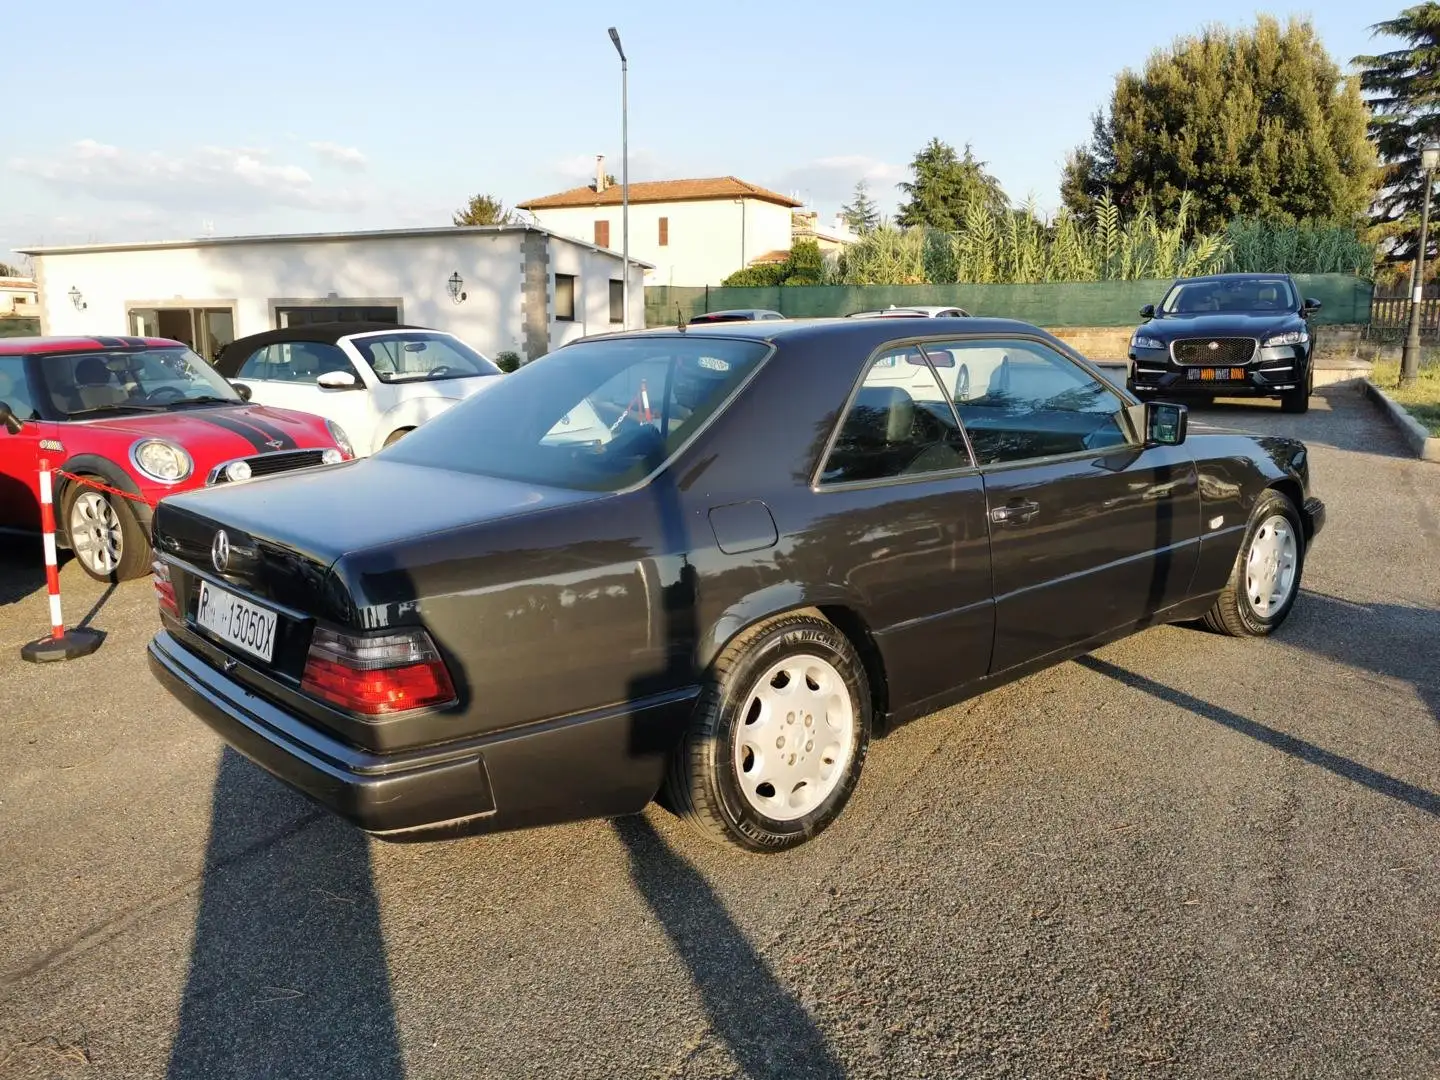 Mercedes-Benz CE 230 COUPE - ABS  - 1989 - RATE AUTO MOTO SCOOTER Negro - 2